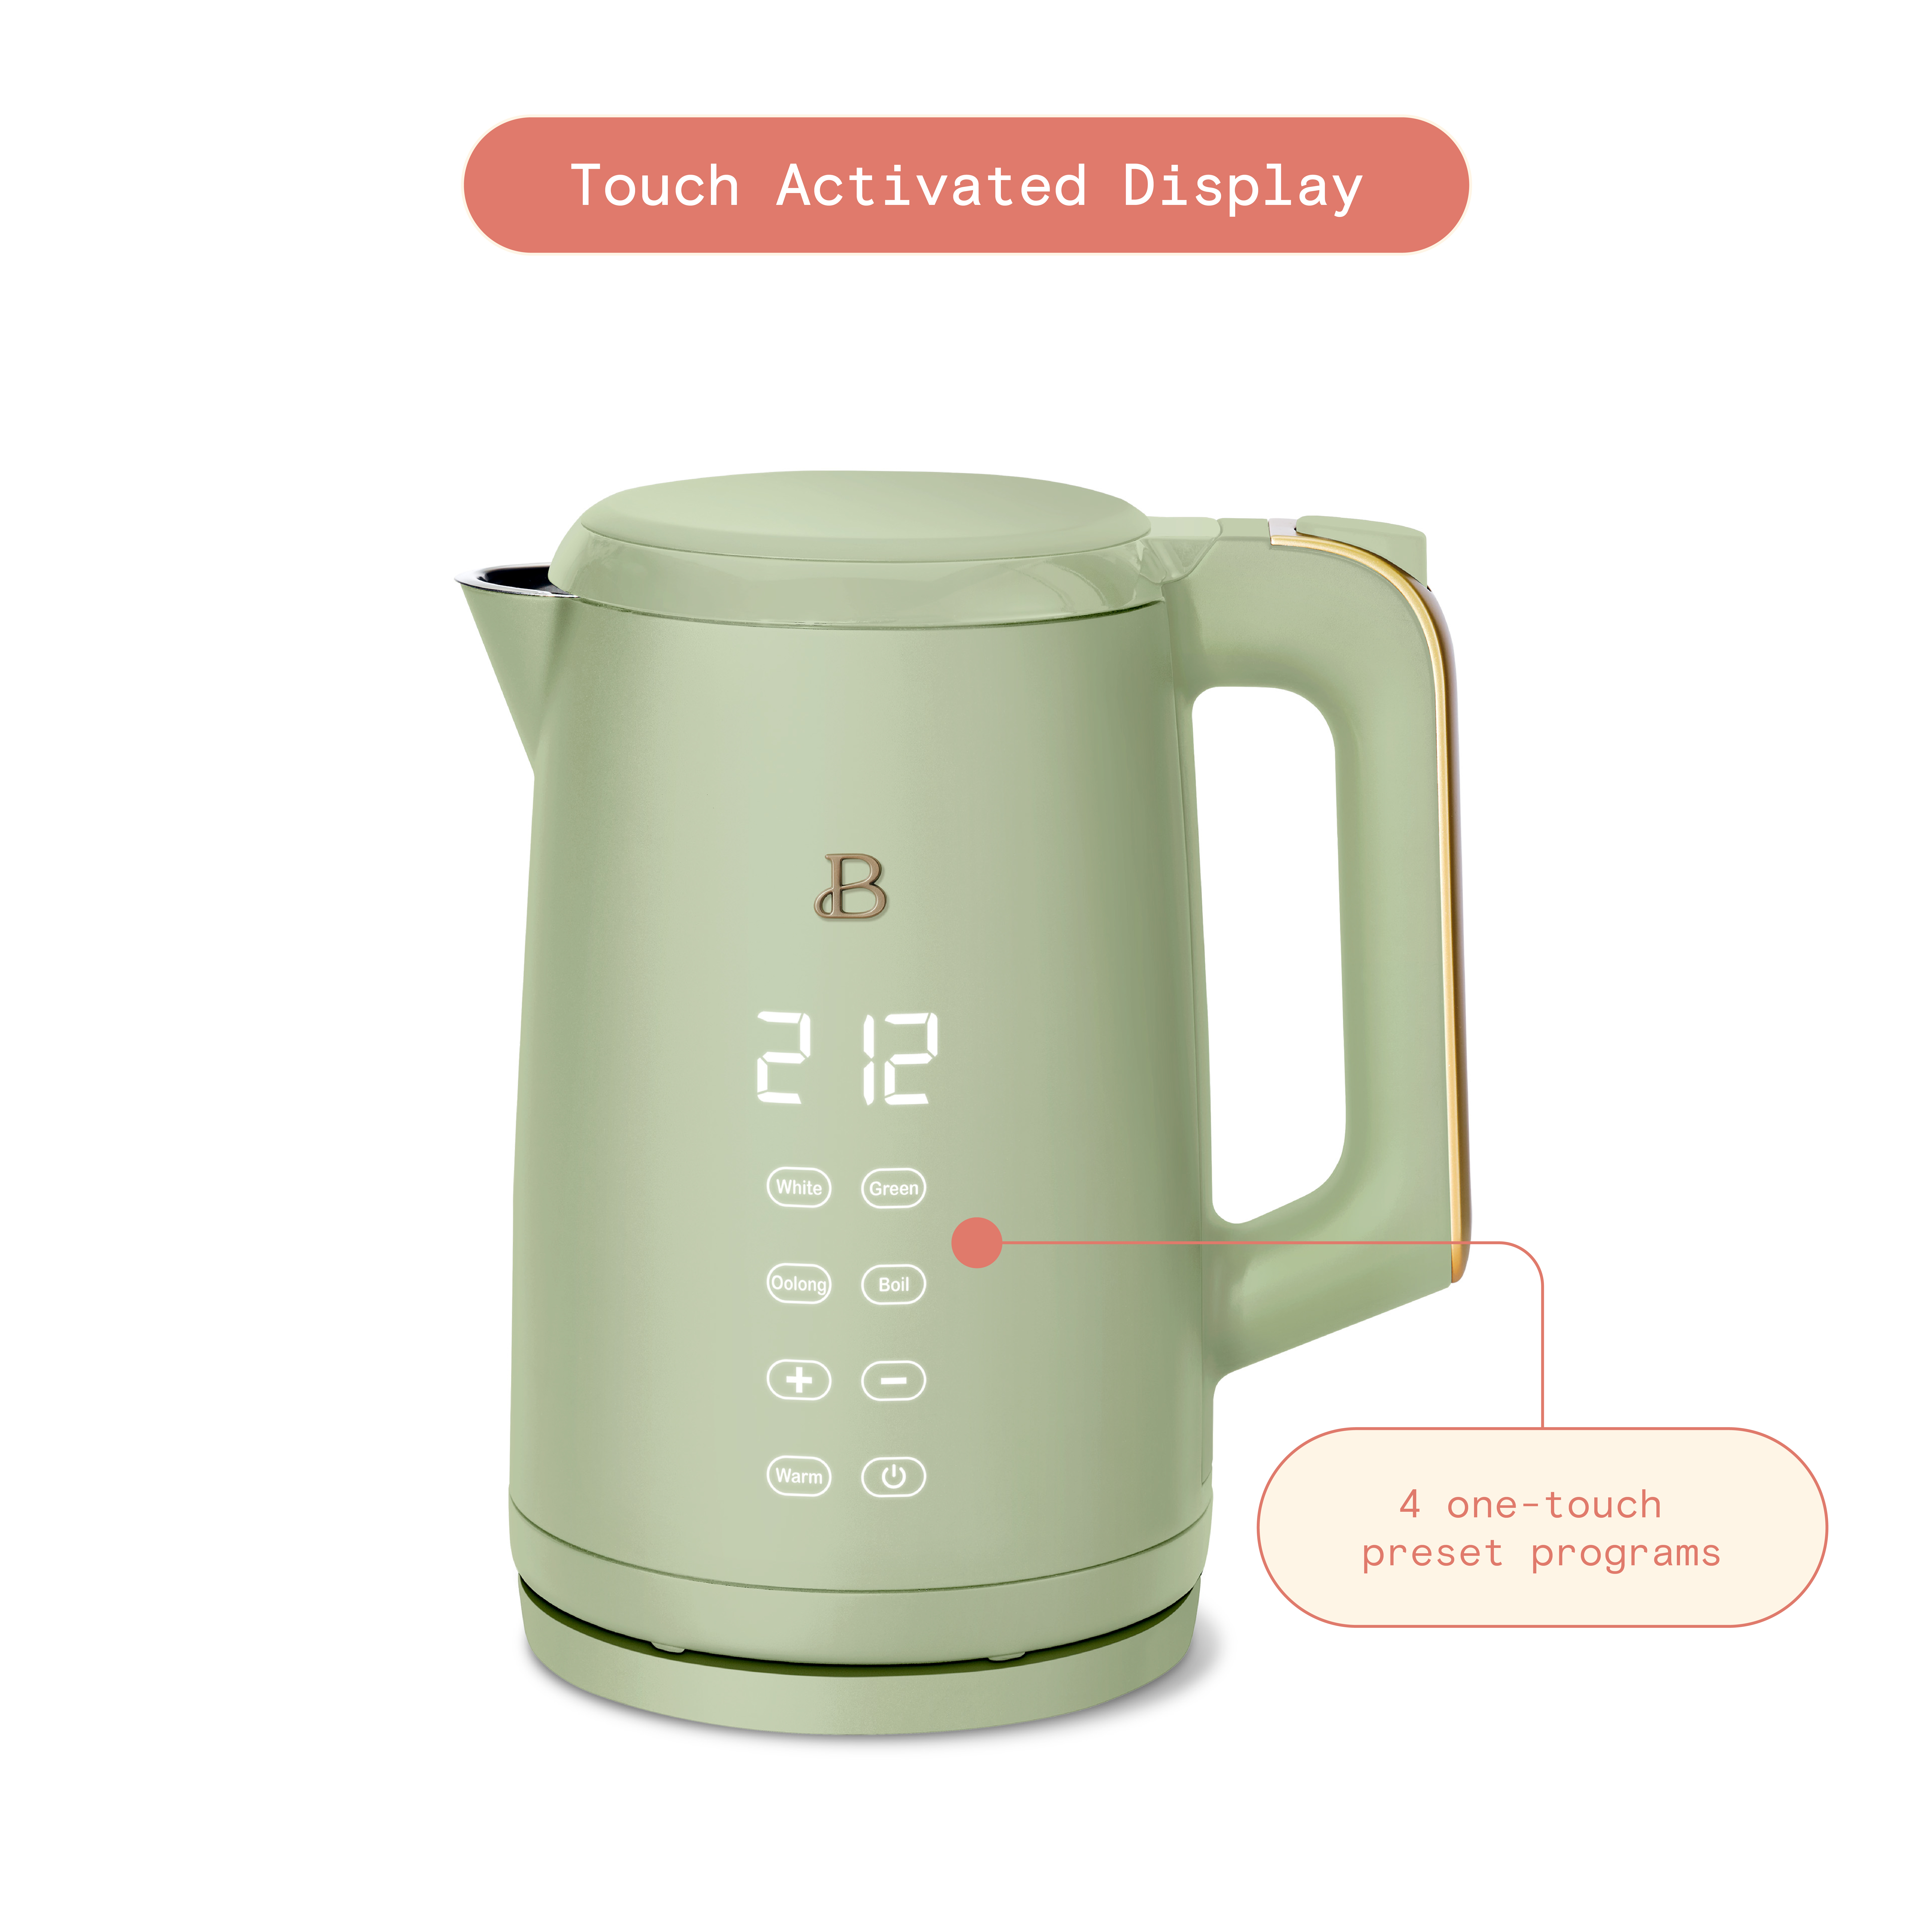 Beautiful 1.7-Liter Electric Kettle 1500 W with One-Touch Activation, Sage Green by Drew Barrymore - image 3 of 8